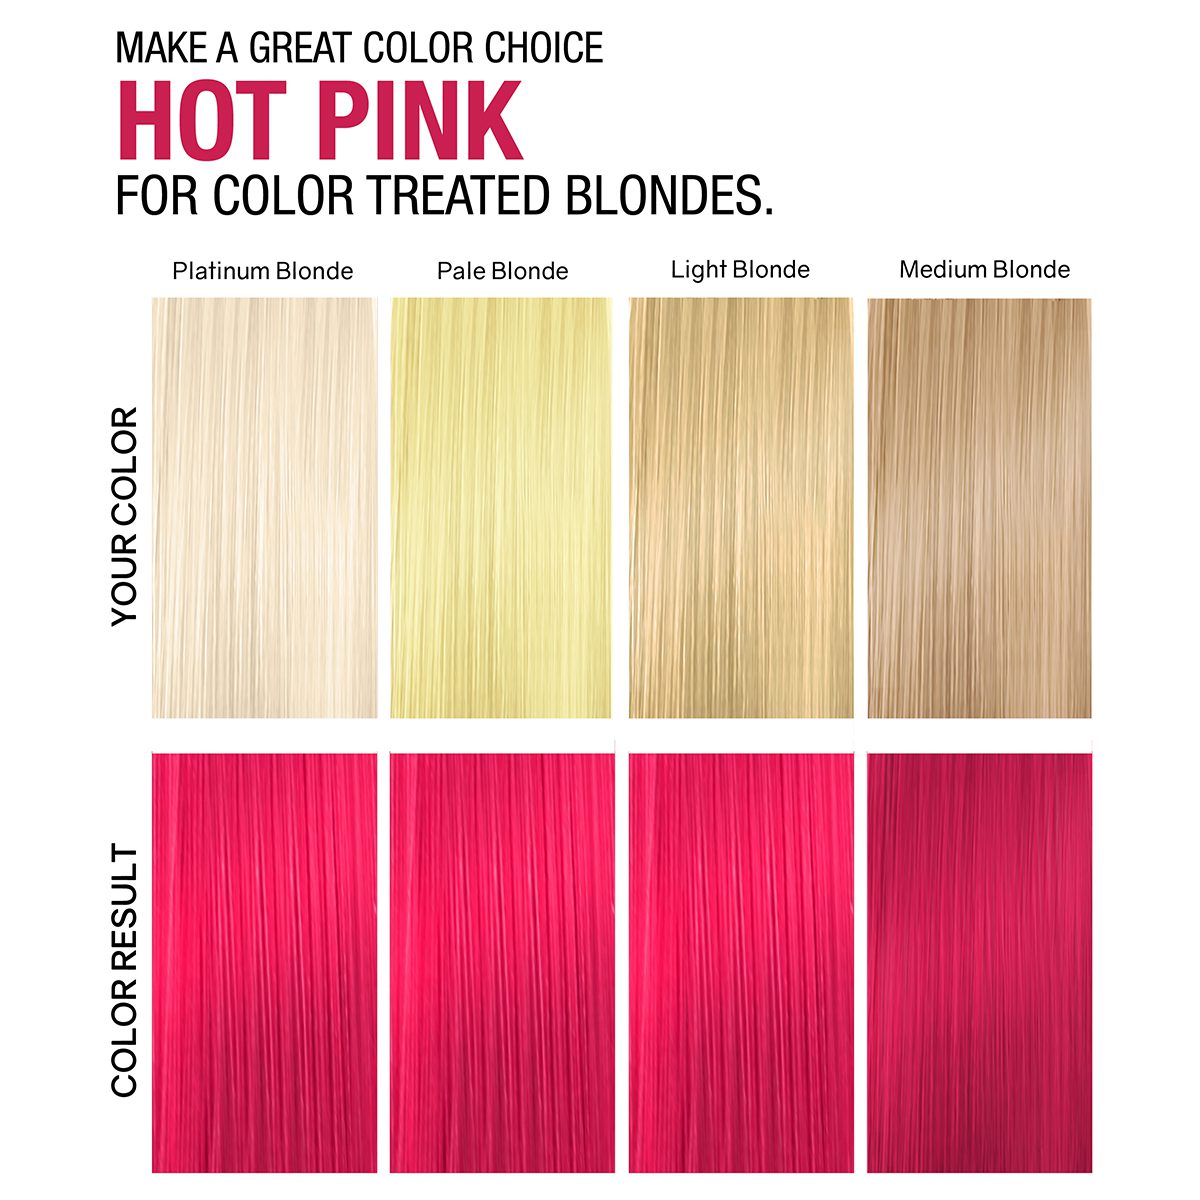 Hot Pink for color treated blondes.